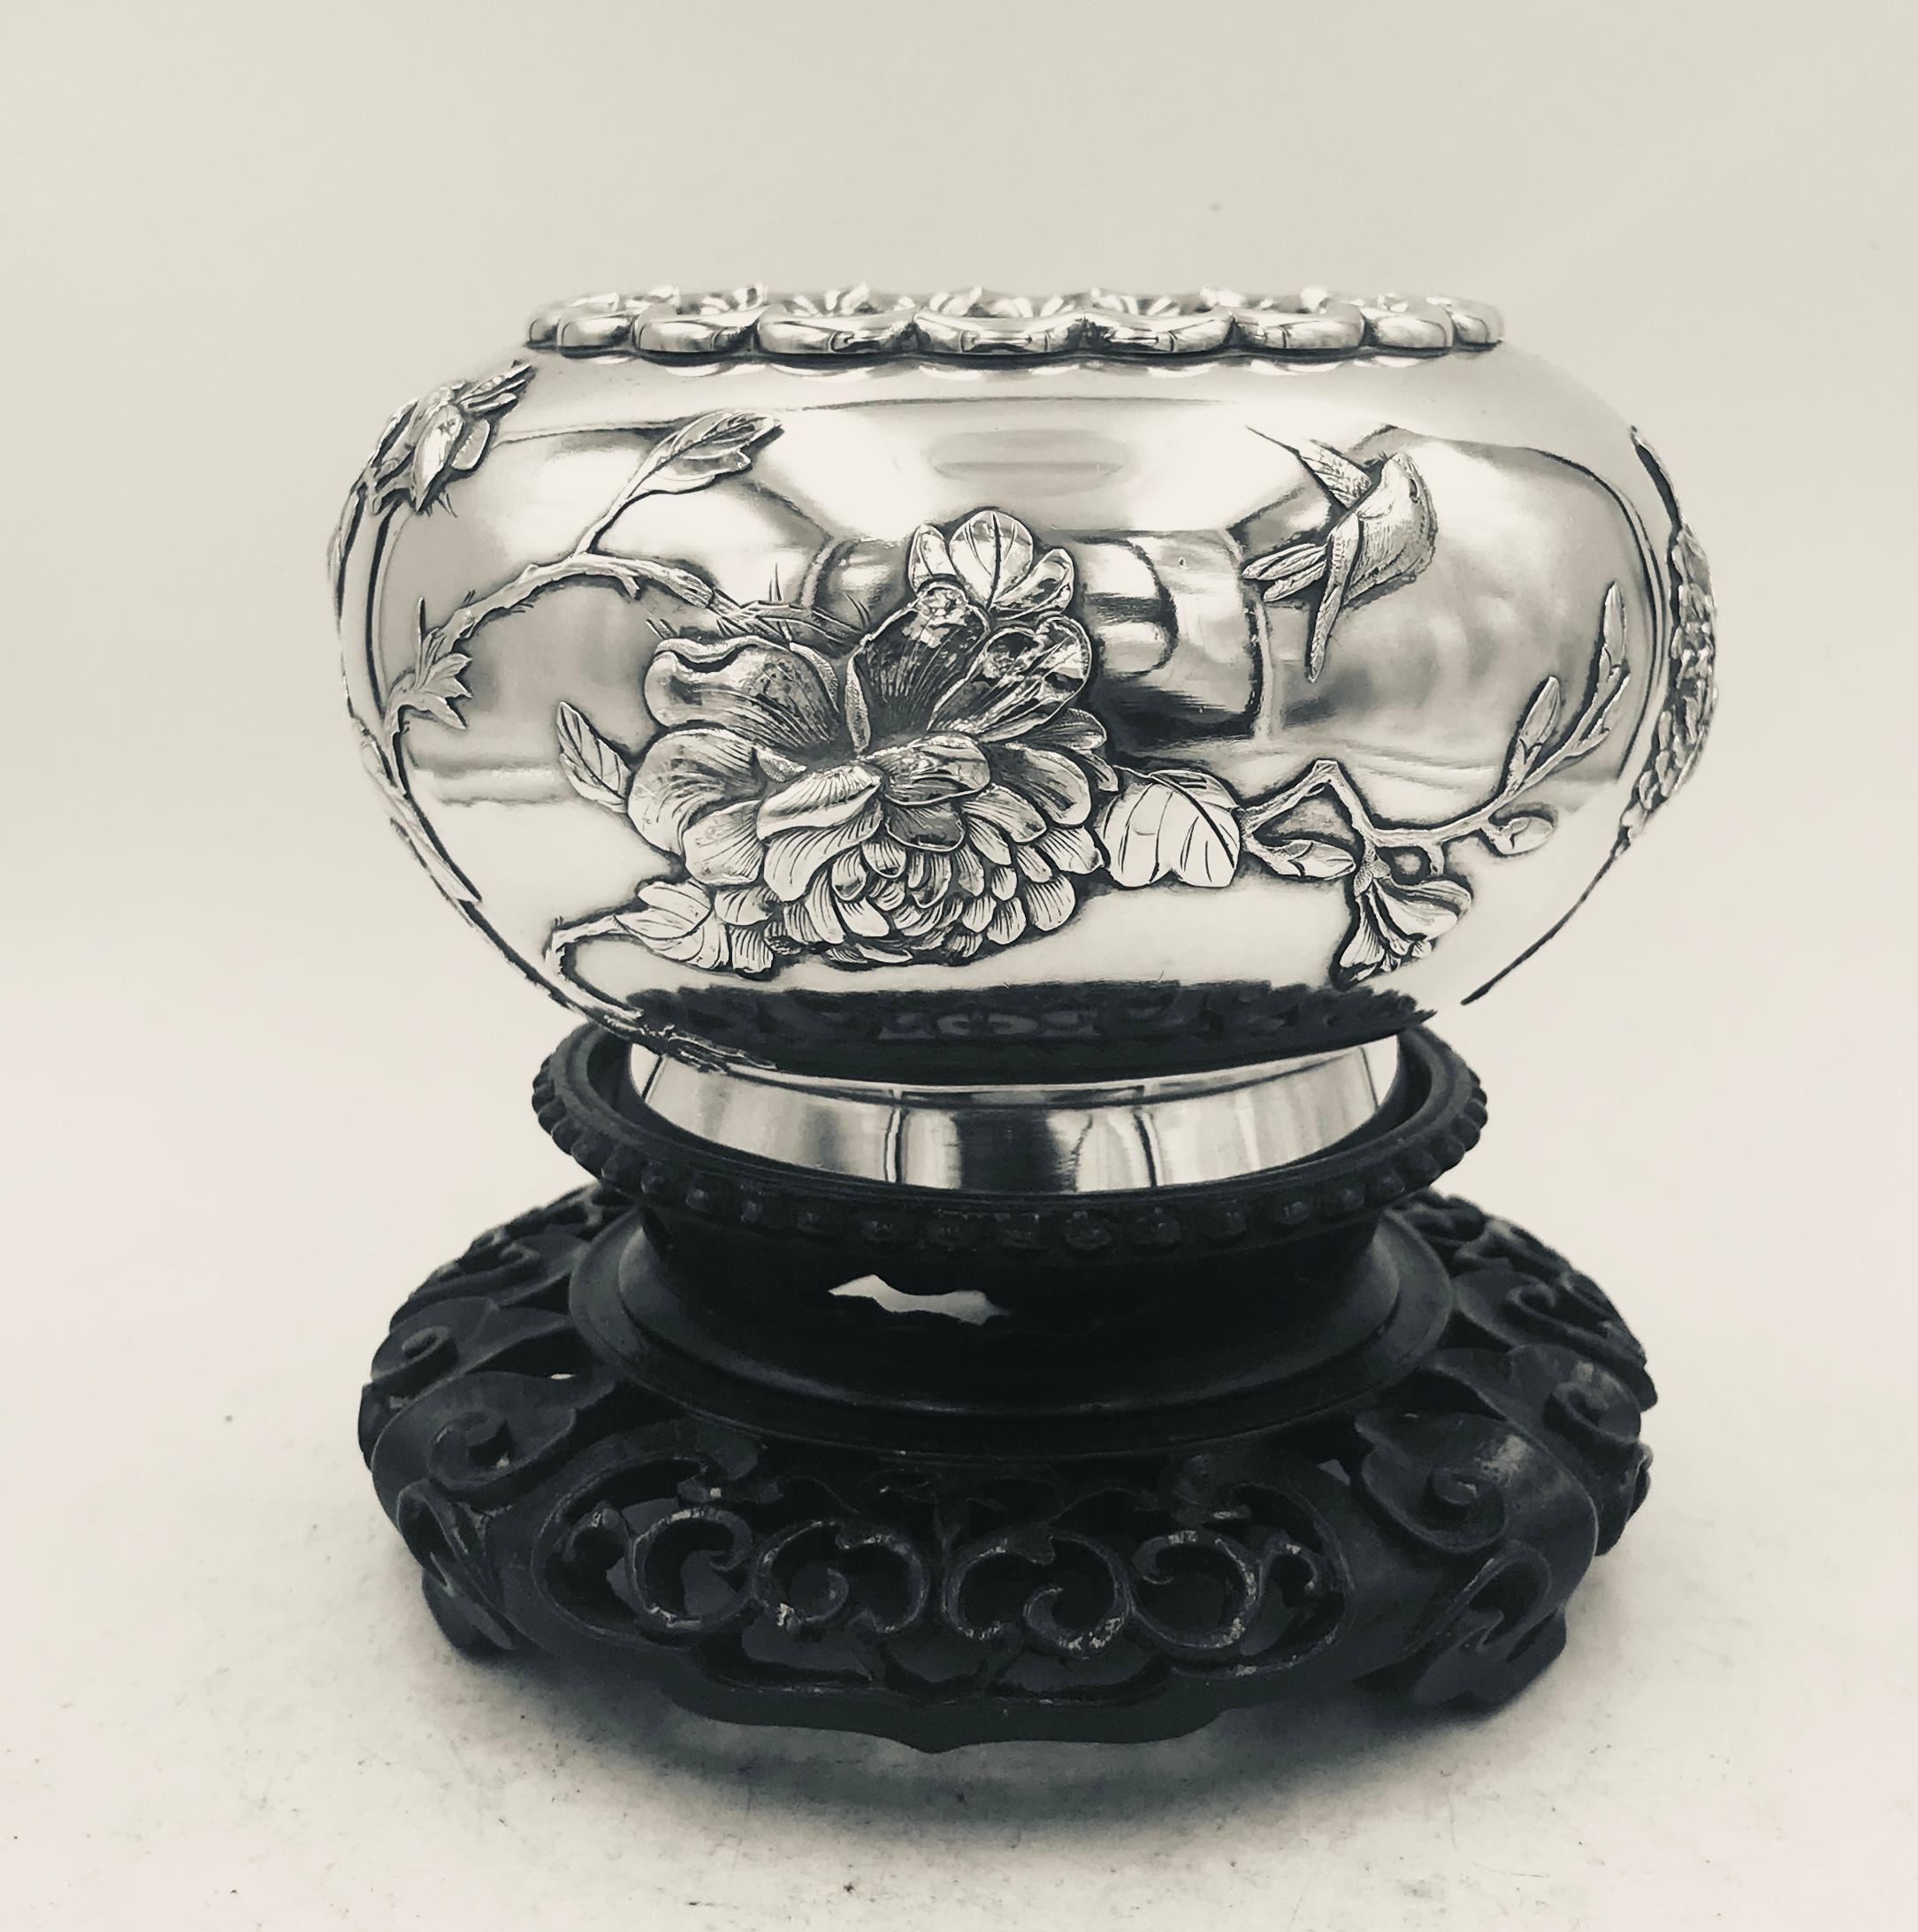 Chinese export silver bowl with applied chrysanthemum, prunus and birds. The bowl has a wavy rim, collet foot and gilt interior and is shown sitting on a pierced wood stand. Marked with '泰安‘ (TaiAn), which is a rare maker's mark, and retailer's mark